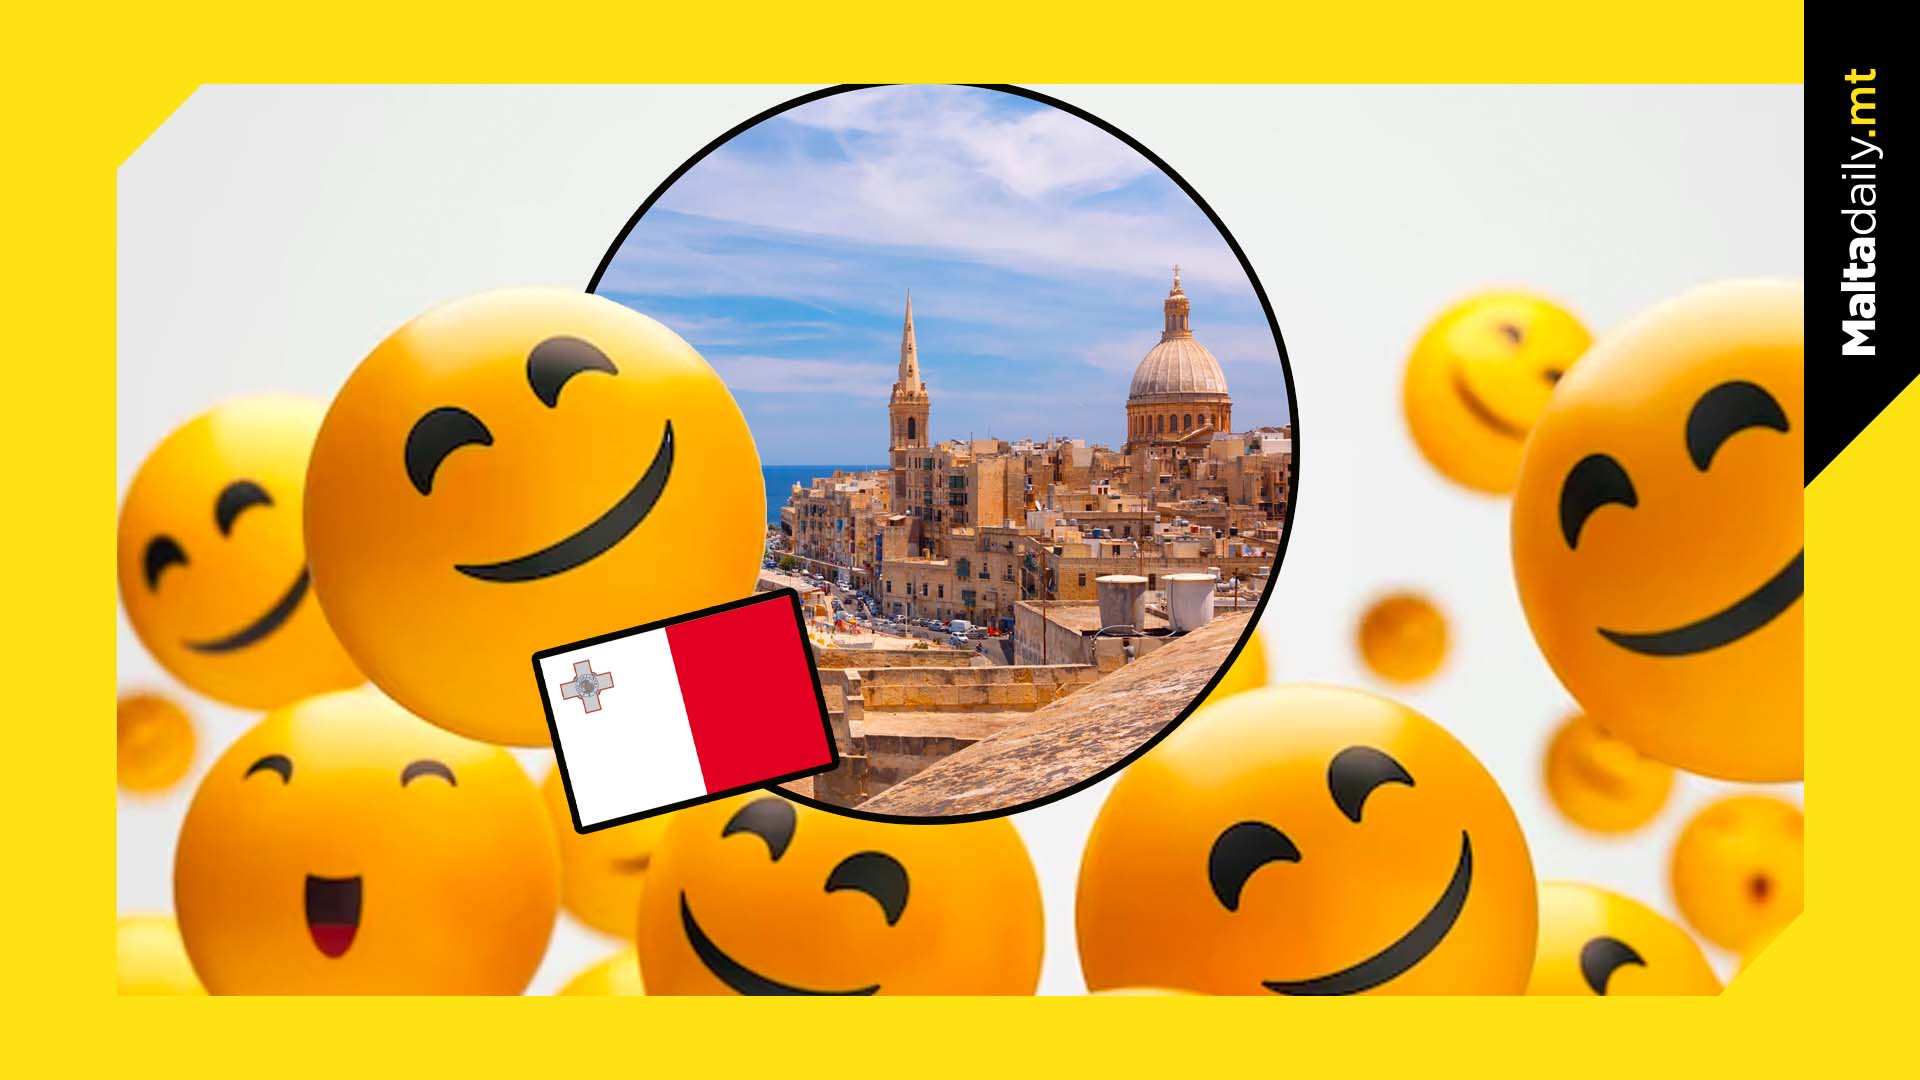 66.6% of Maltese are happy with their lives